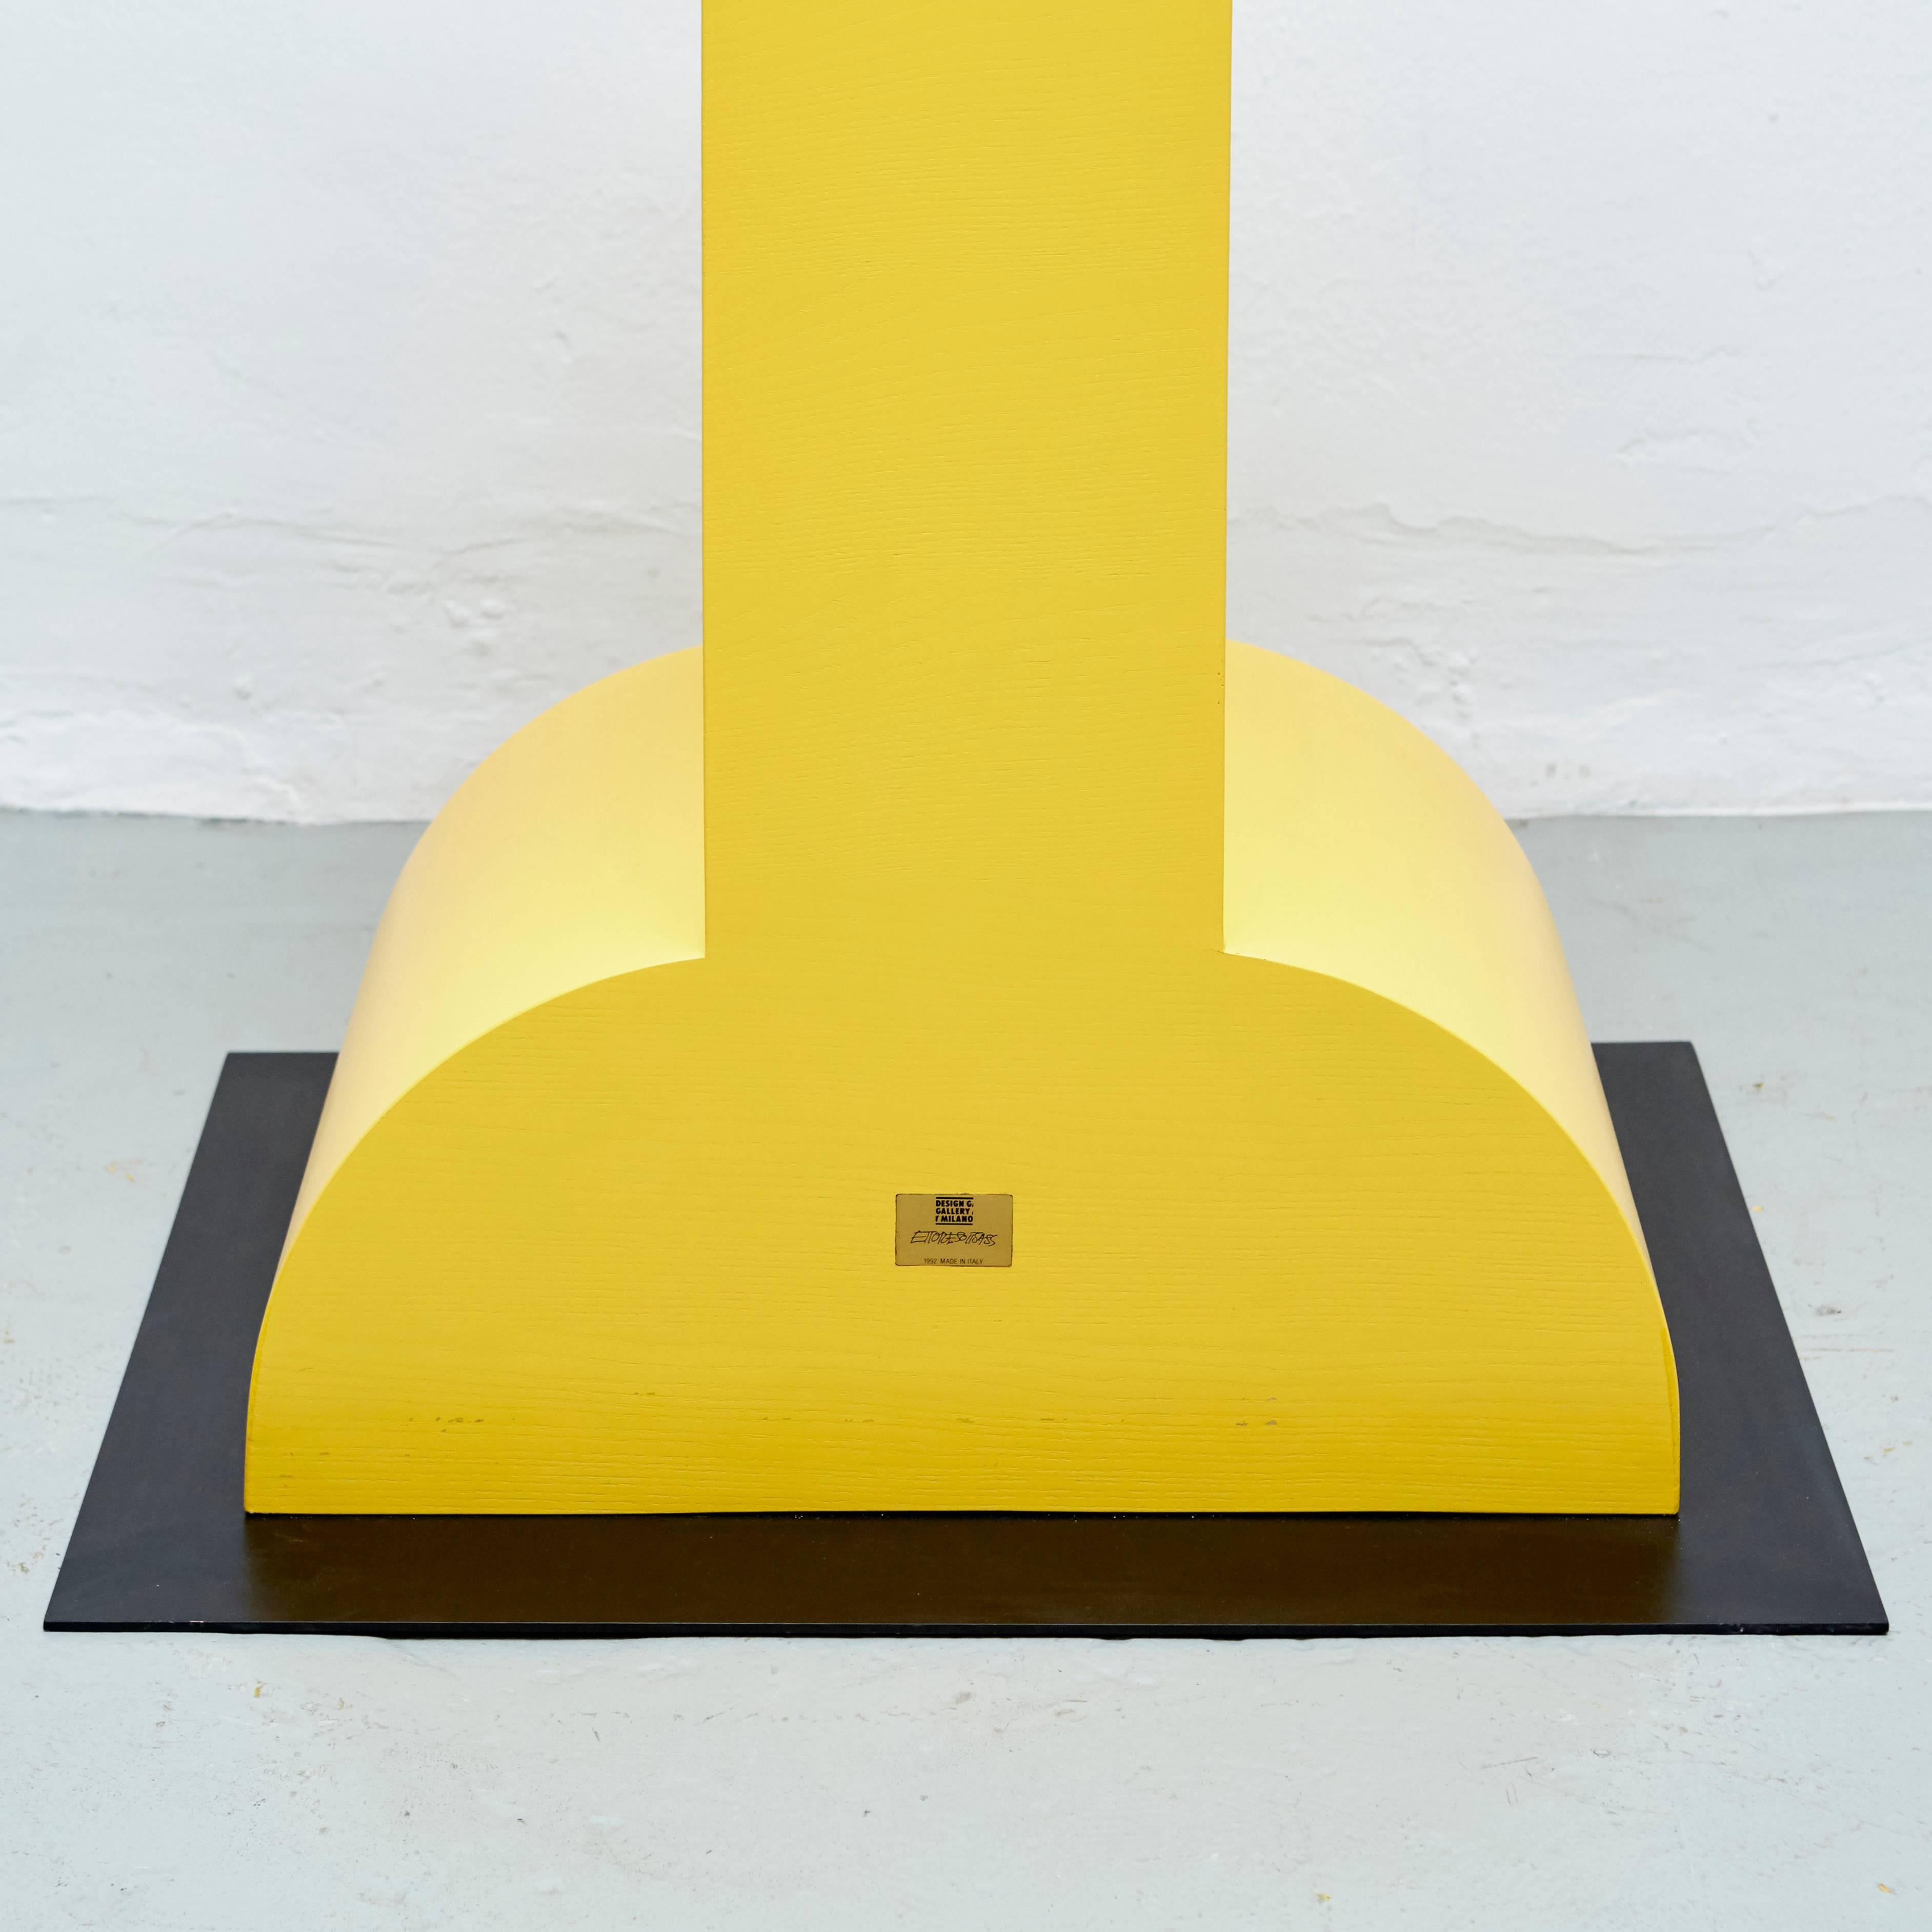 Base Metal Ettore Sottsass Missionario Yellow Memphis Pedestal by Design Gallery Milano, 92